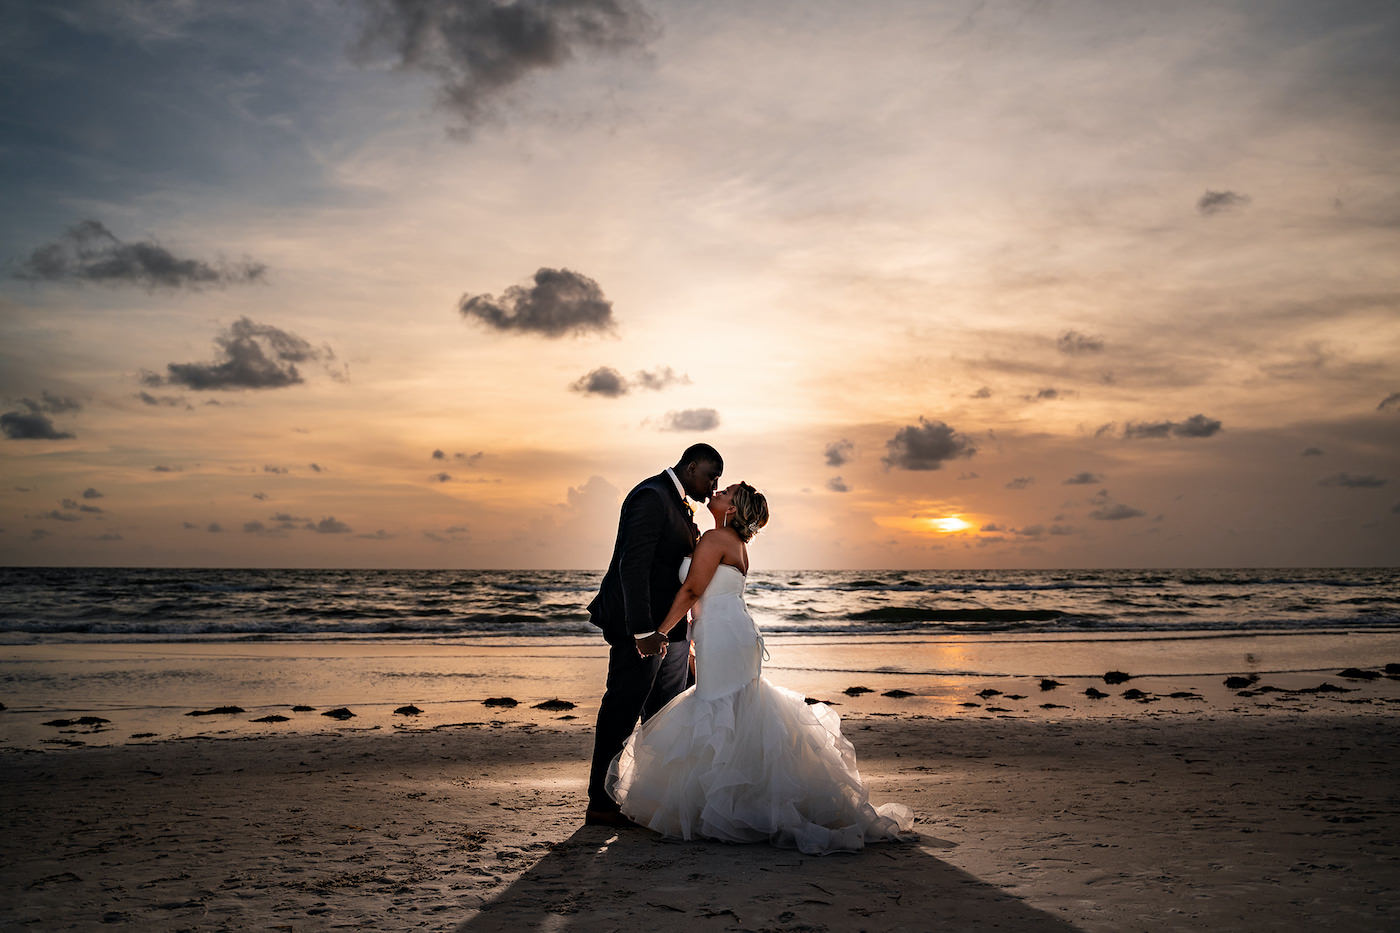 Tampa Bay Bride and Groom Take Sunset Stroll on Clearwater Beach, Bride Wearing Sophisticated Fit and Flare Strapless White Wedding Dress | Florida Wedding Hair and Makeup Artist Michele Renee The Studio